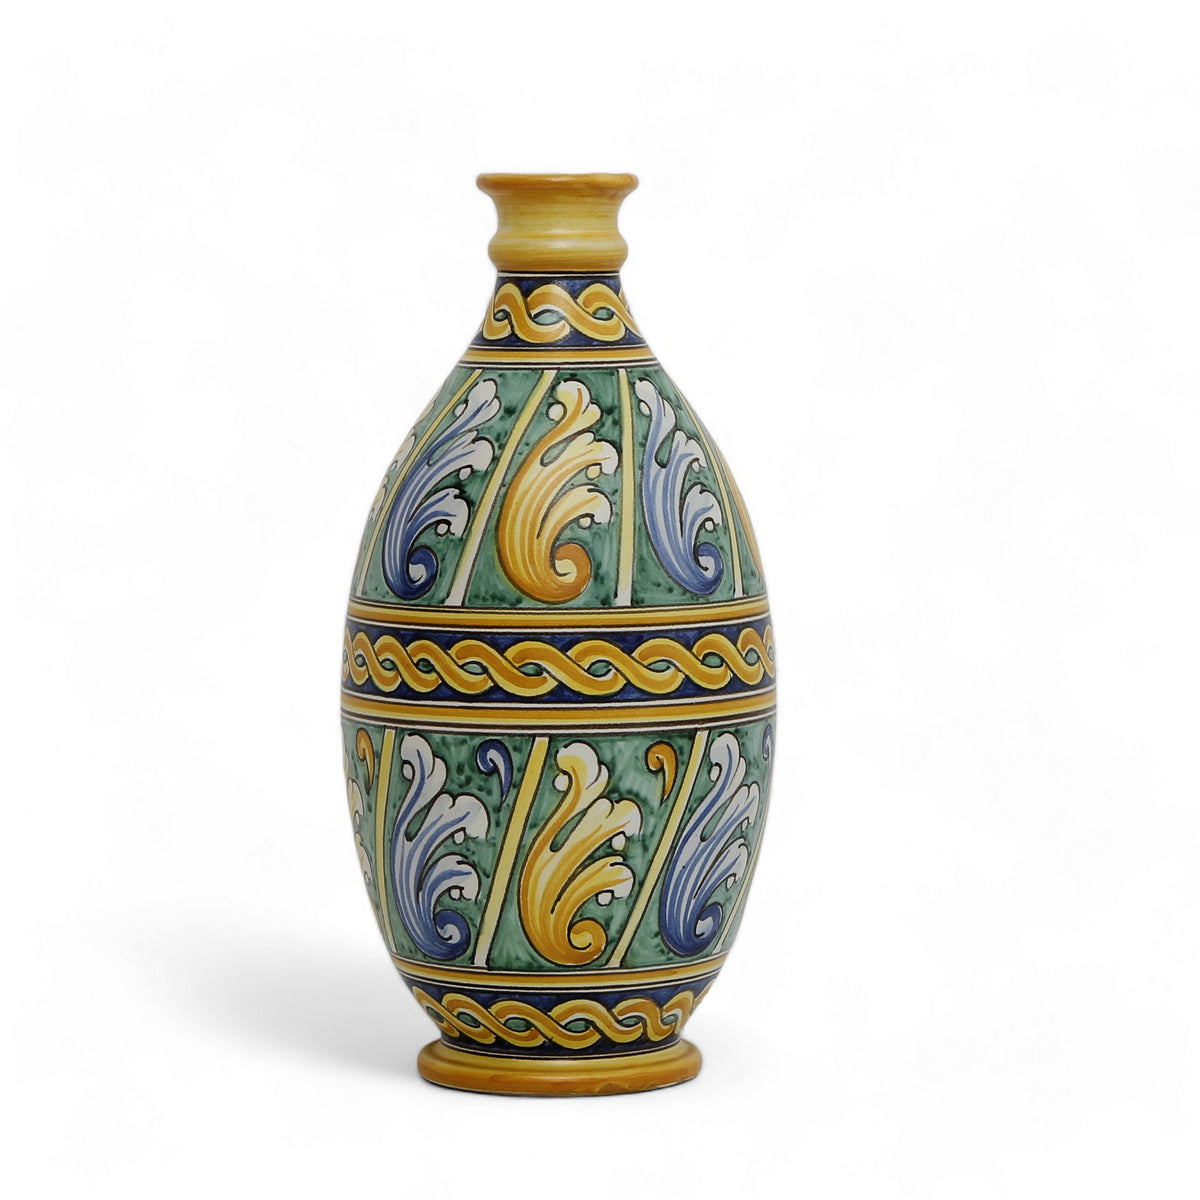 SICILIANA: Bottle Vase "Belly" featuring traditional Green and Gold Sicilian Vario Design